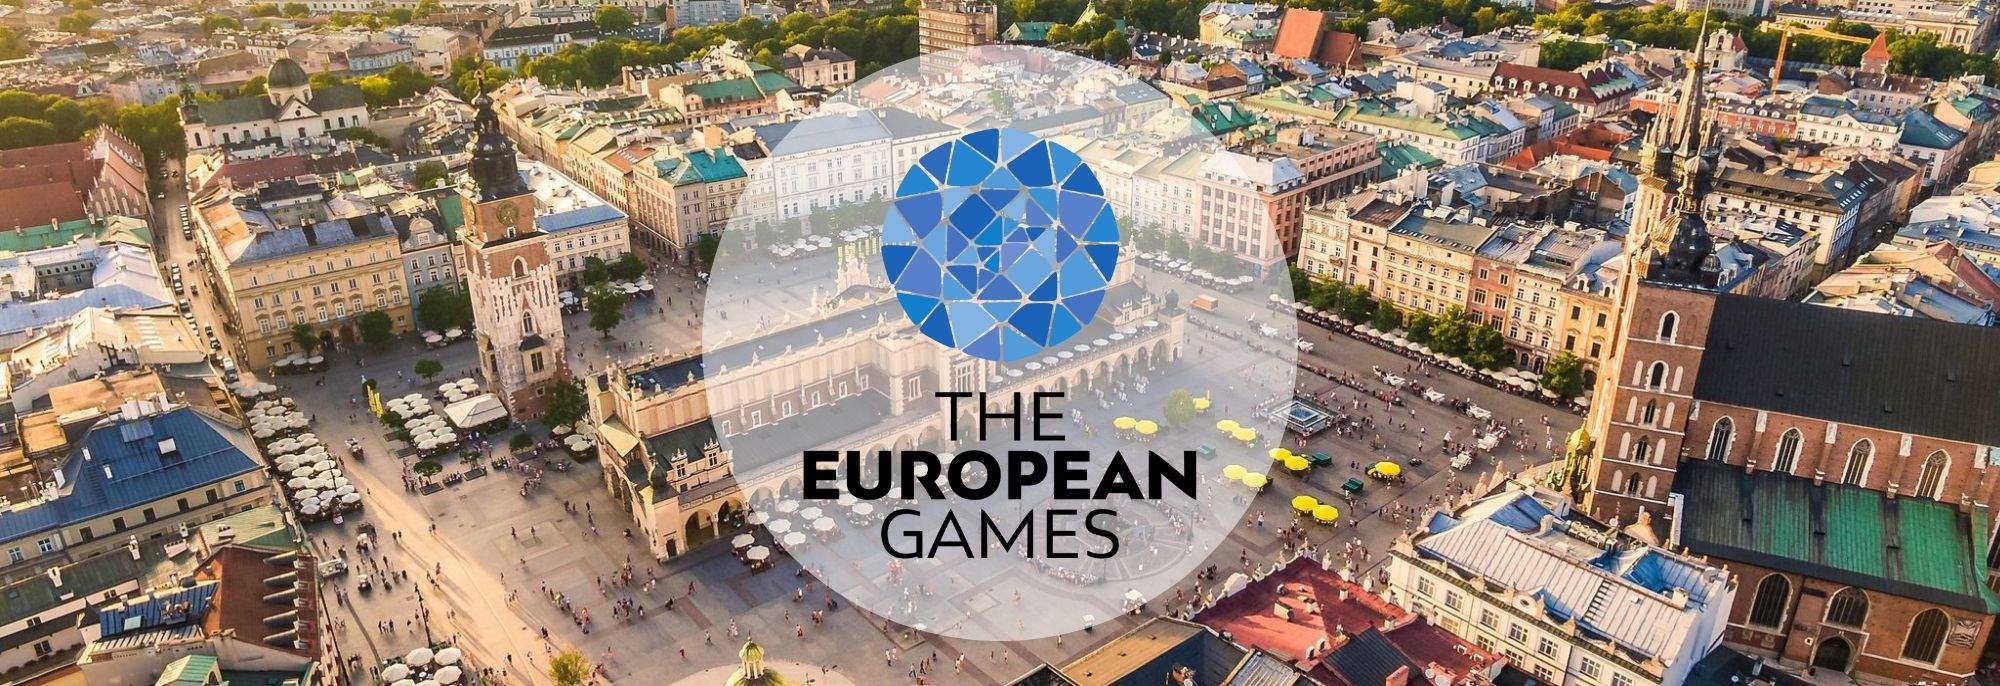 Opening of the III European Games in Krakow and Malopolska 2023 – A spectacle of sport and culture